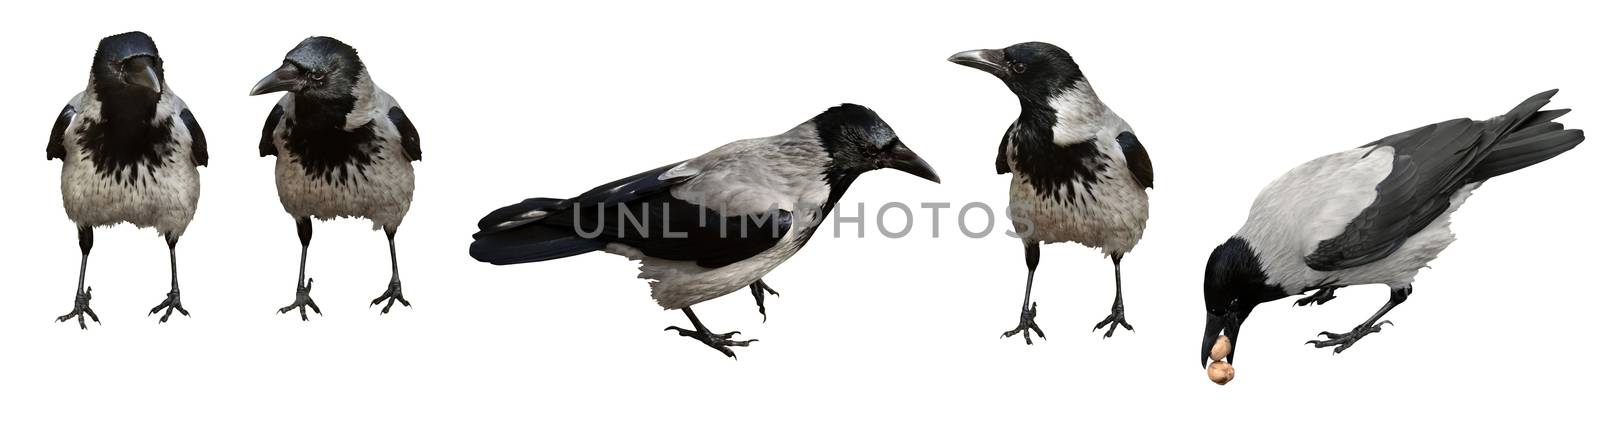 Five crow birds standing on white background. Isolated with path.